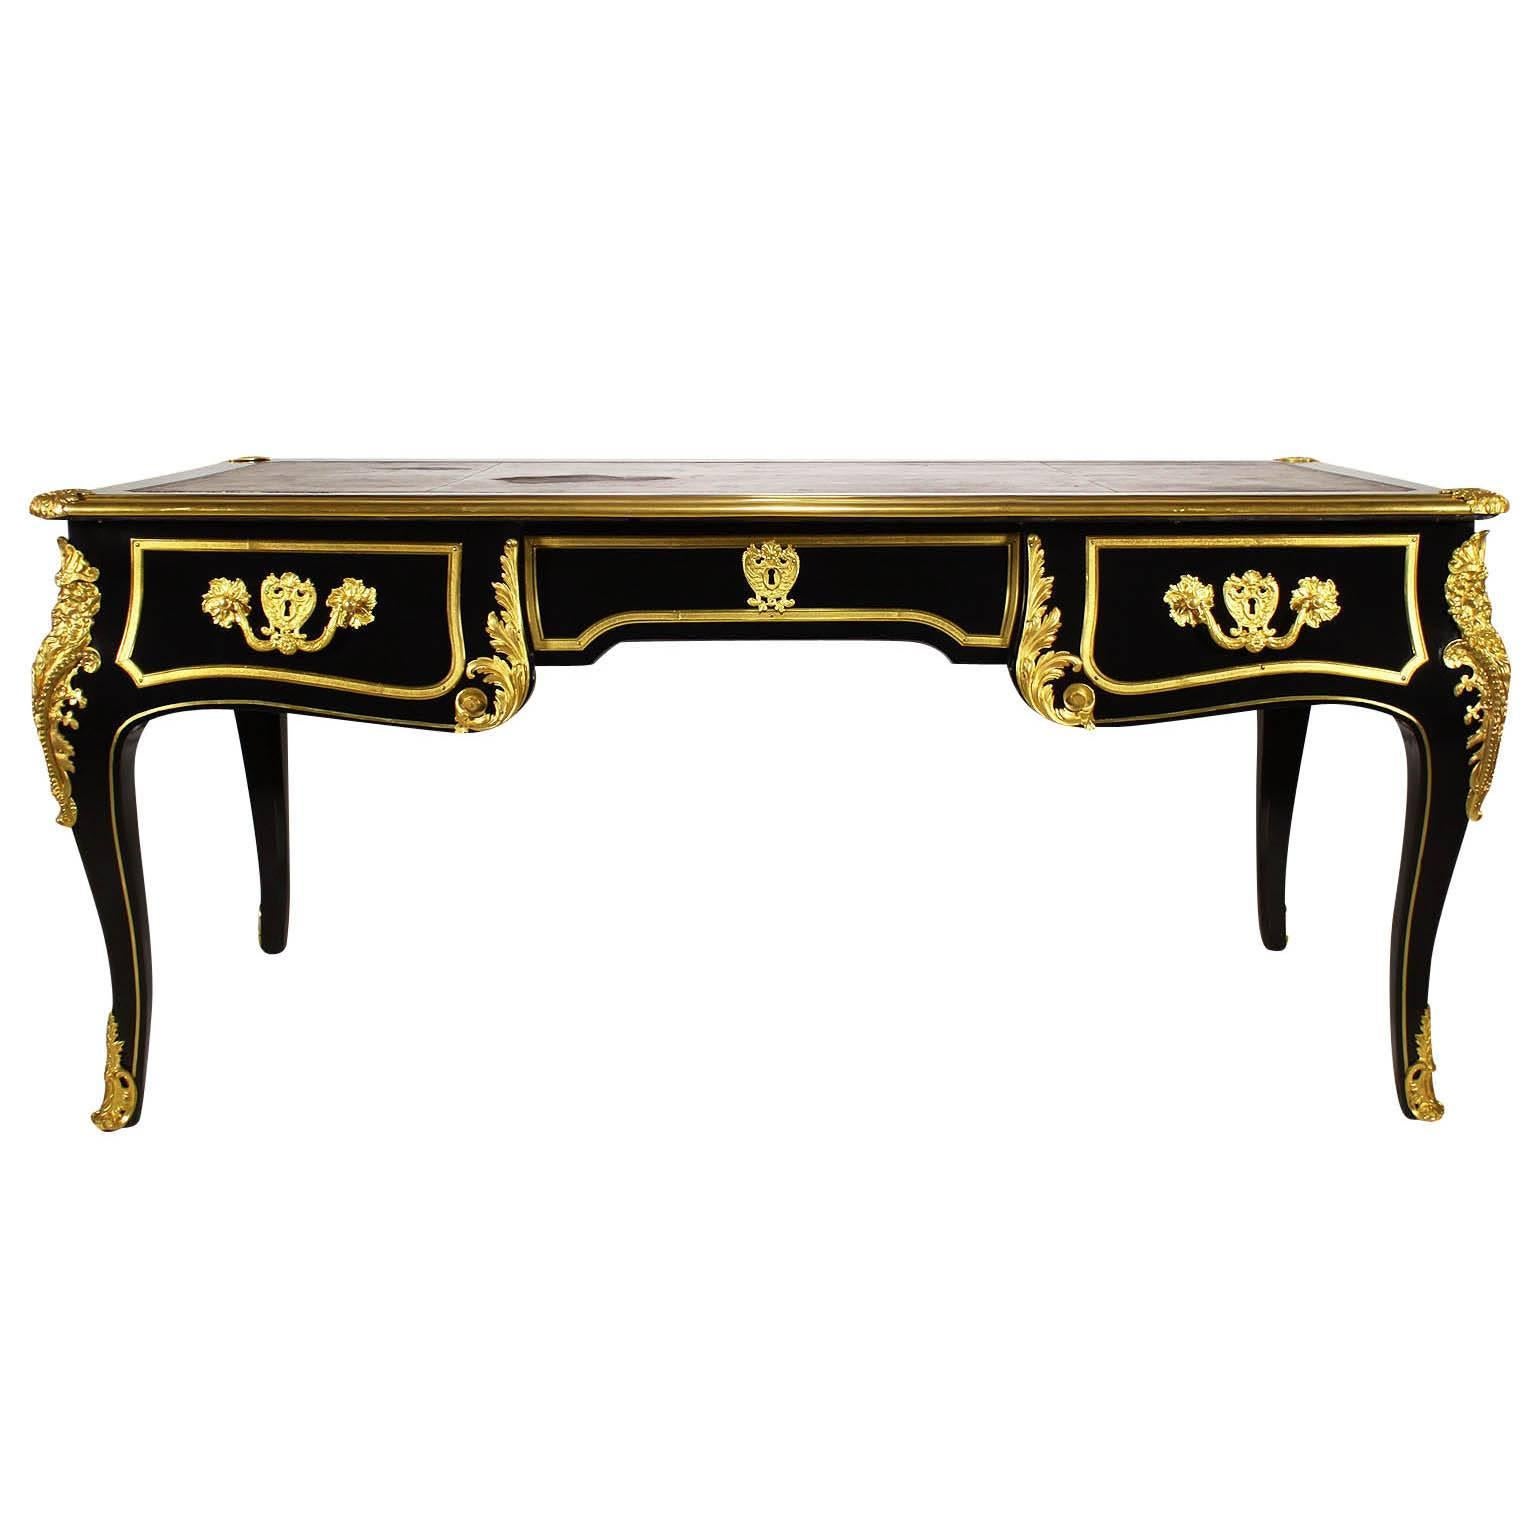 French 19th Century Louis XV Style Ebonized Wood and Gilt Bronze-Mounted Desk For Sale